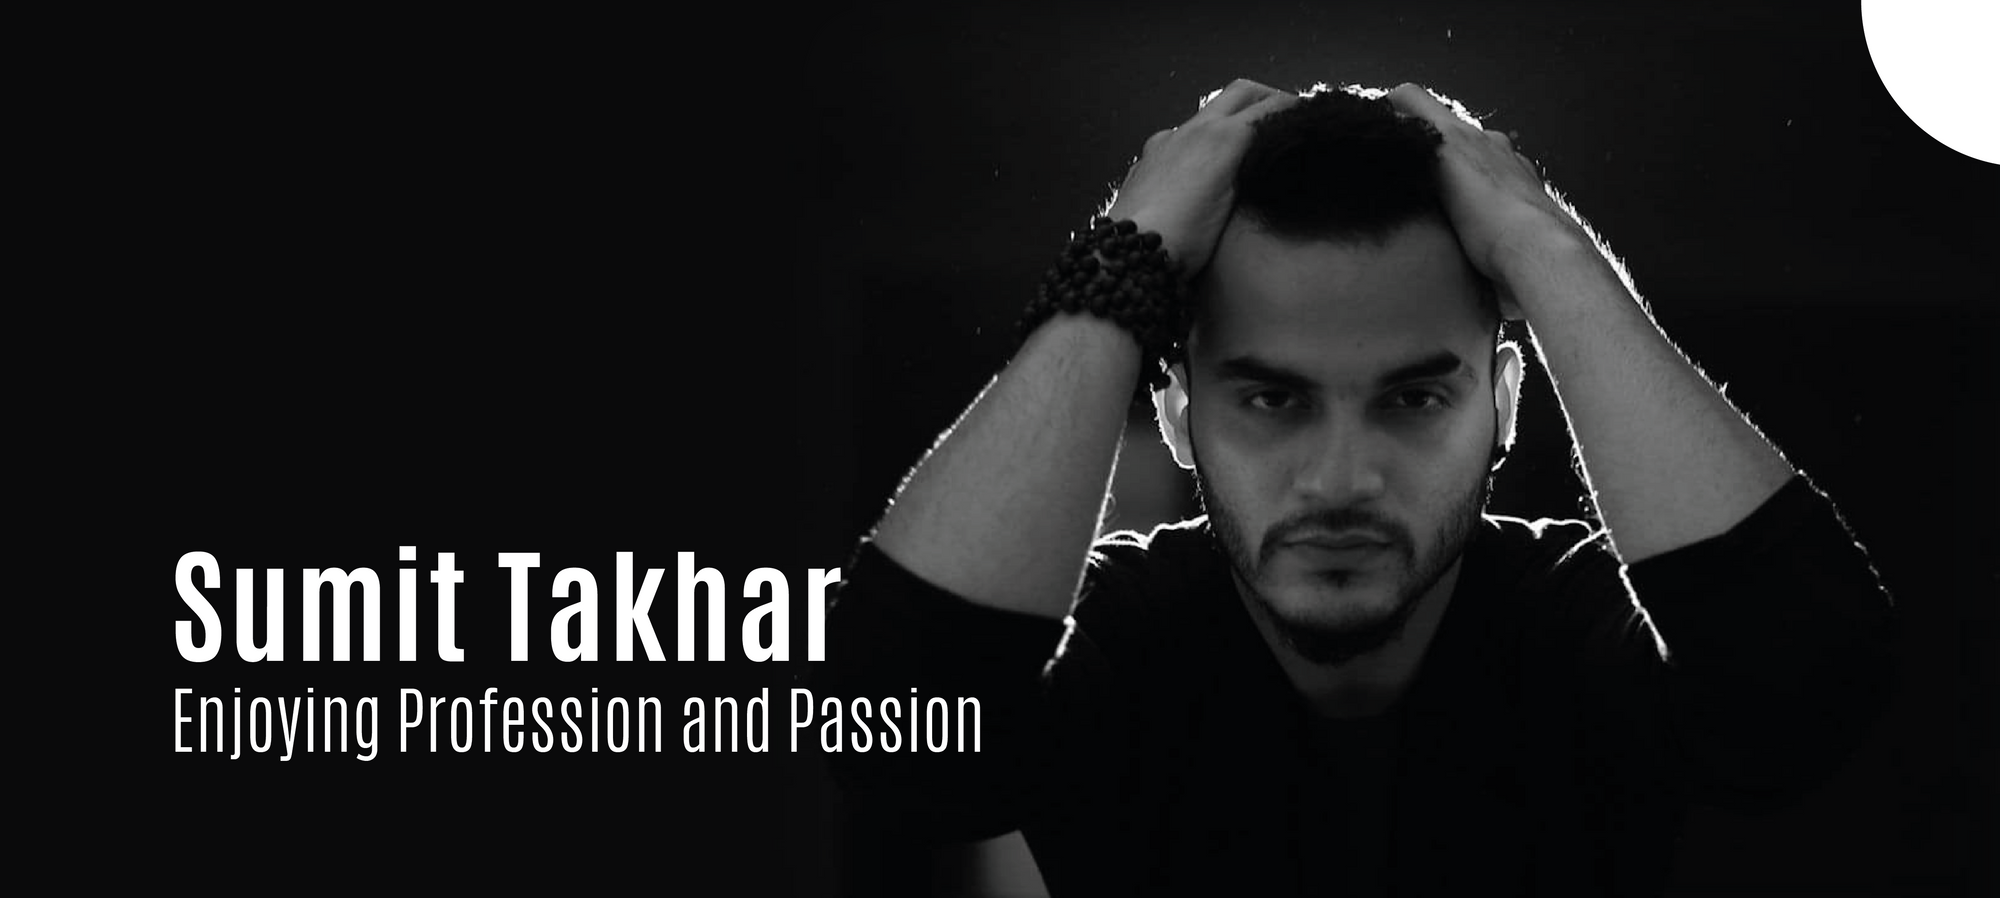 Sumit Takhar is a dietician, fitness instructor and dancer based out of Delhi. 